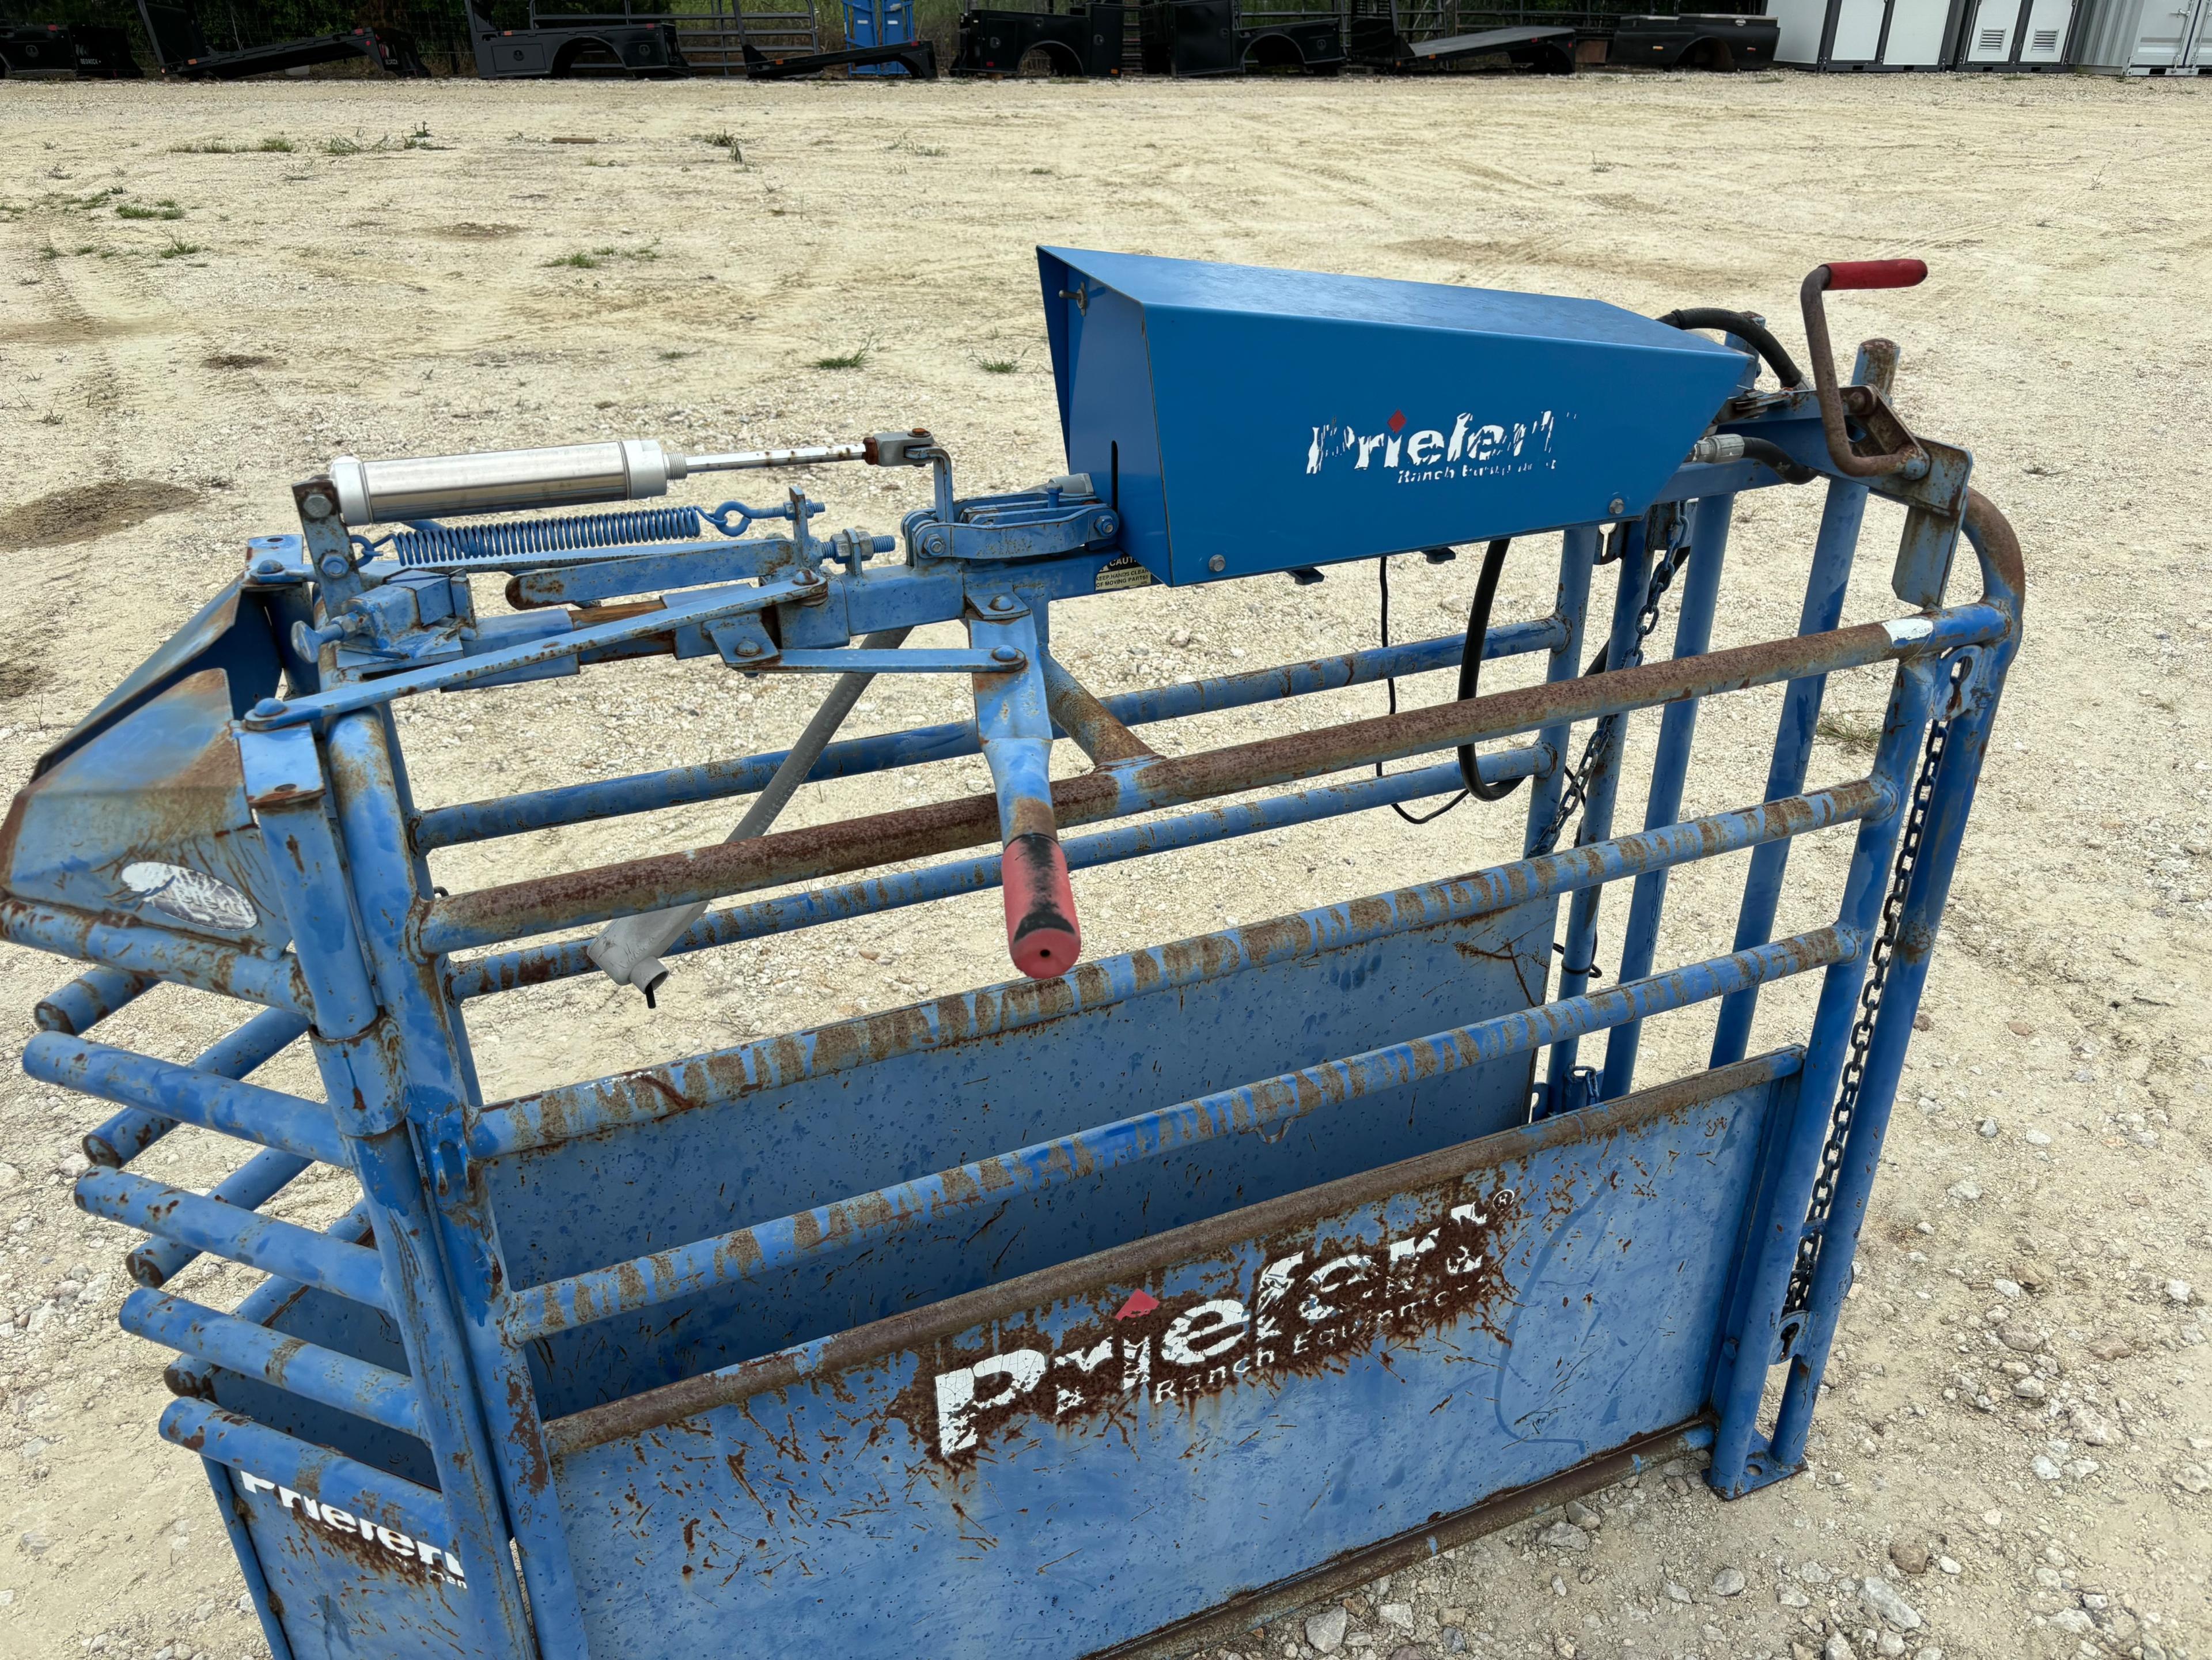 Priefert Fully Automatic Calf Roping Chute